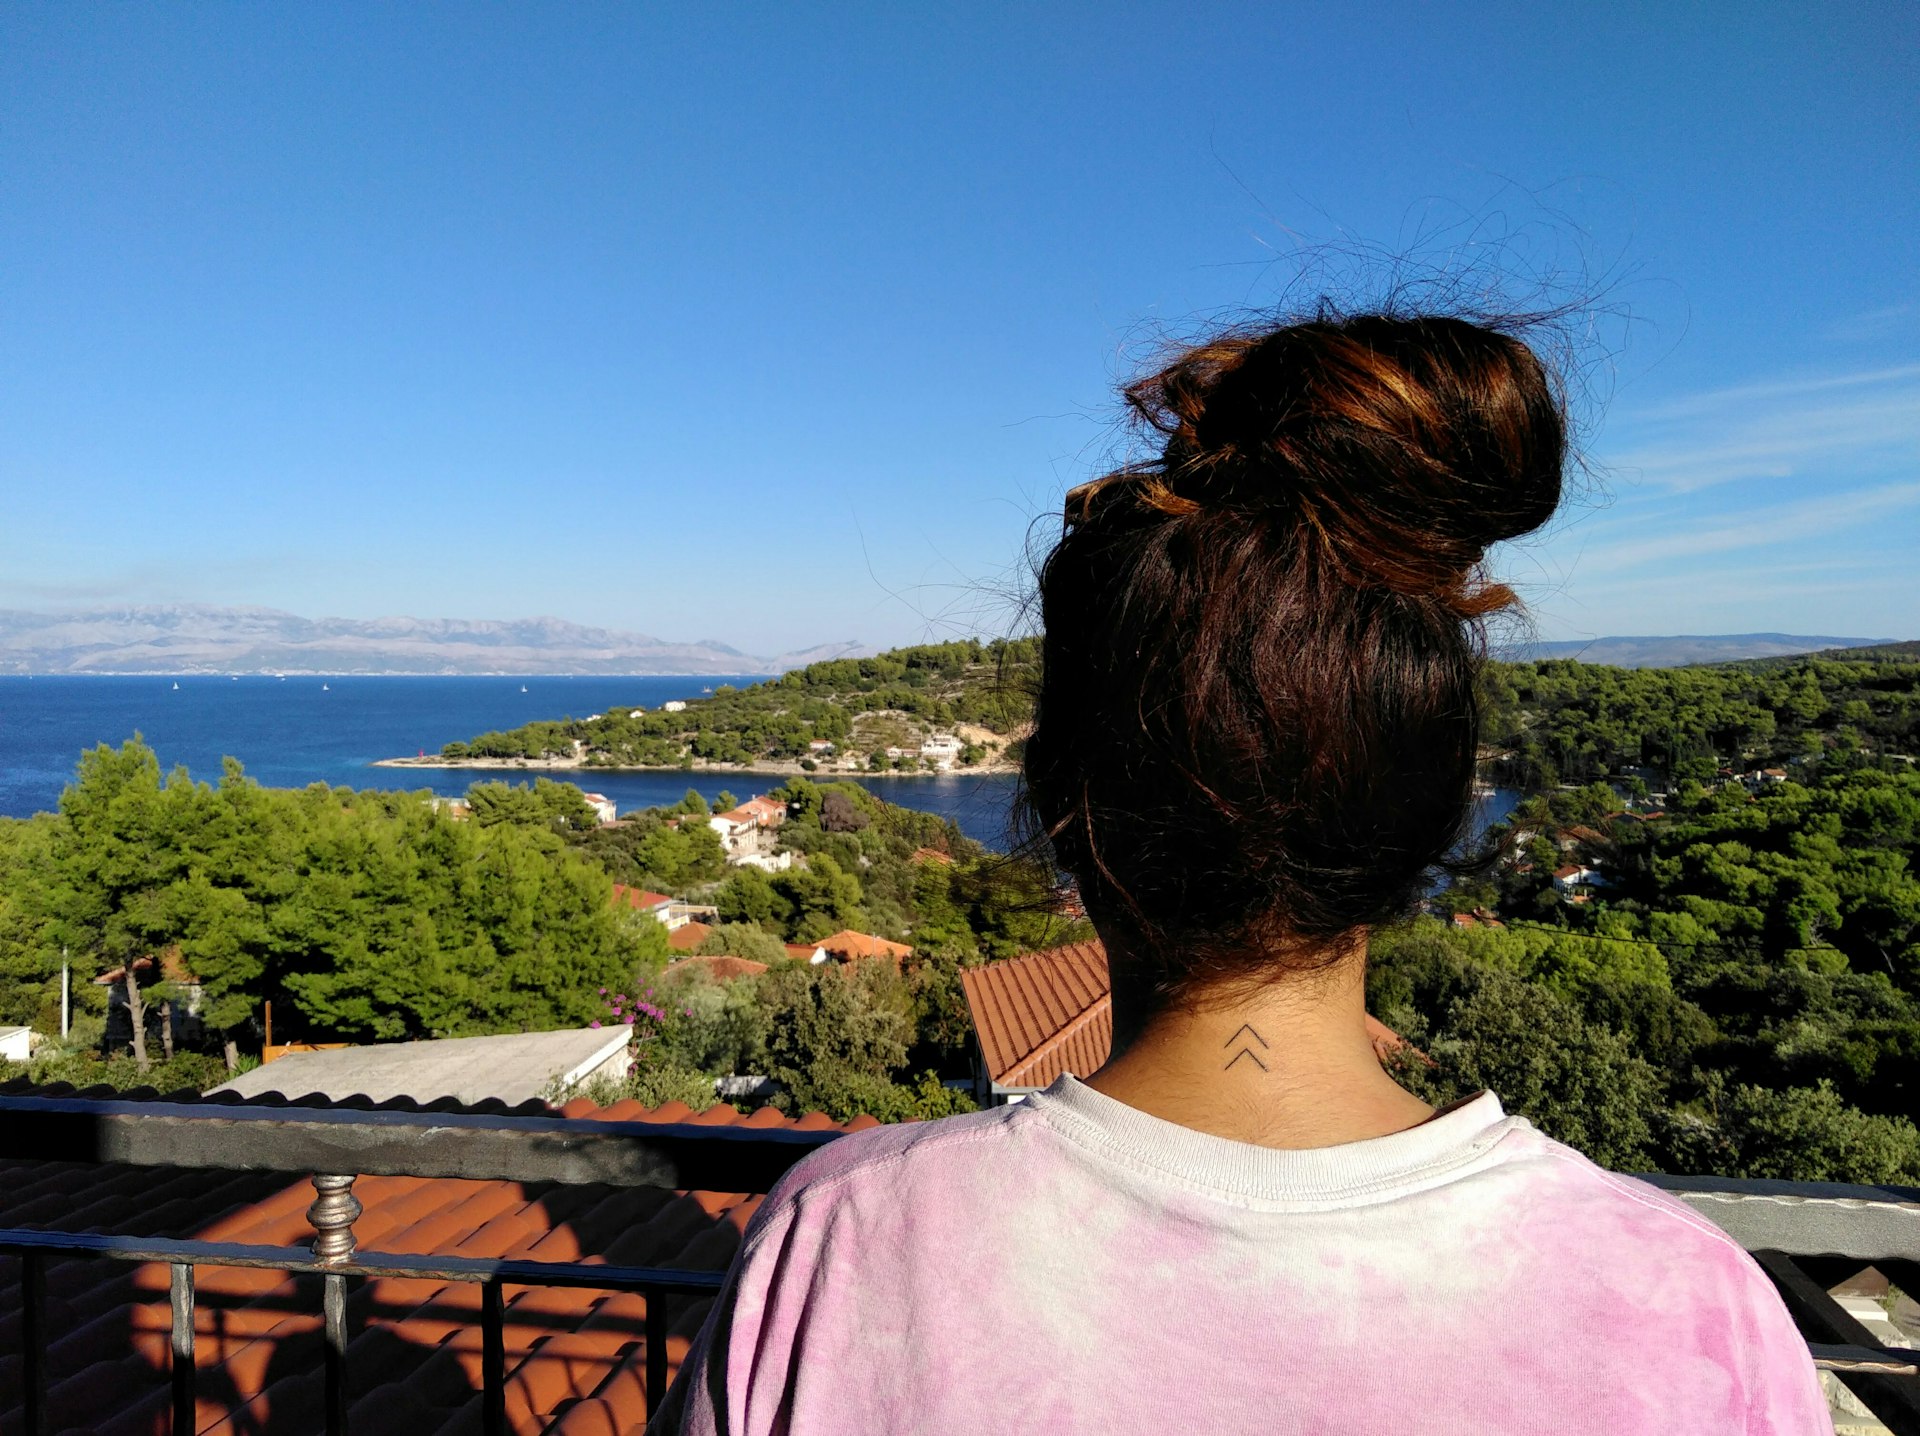 Writer Christina Webb with her back to the camera, gazing out to sea from Croatia's Šolta Island.